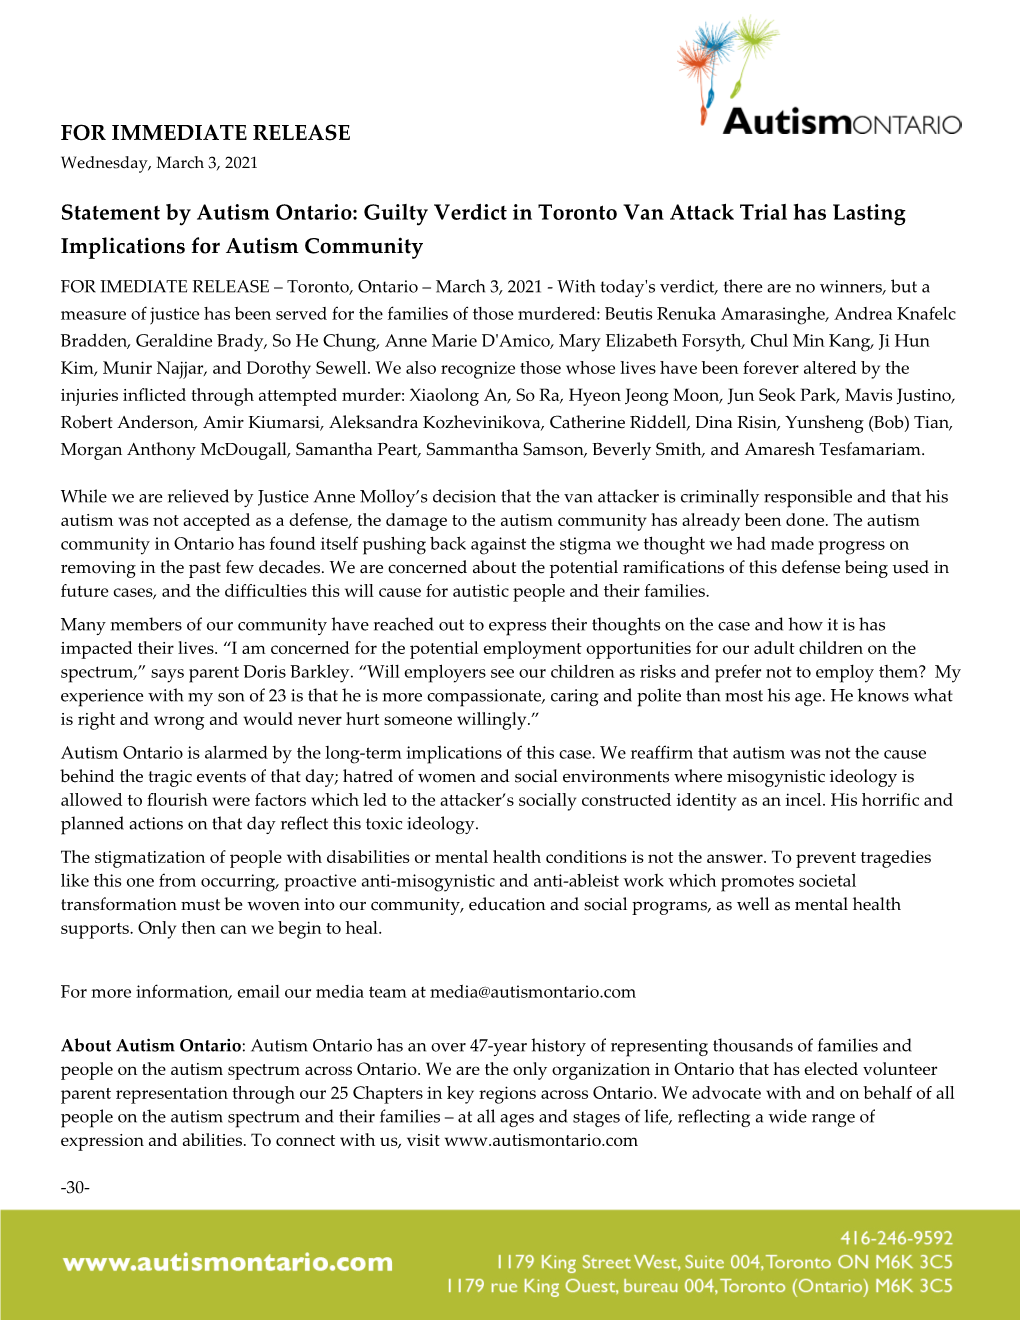 FOR IMMEDIATE RELEASE Statement by Autism Ontario: Guilty Verdict in Toronto Van Attack Trial Has Lasting Implications for Autis